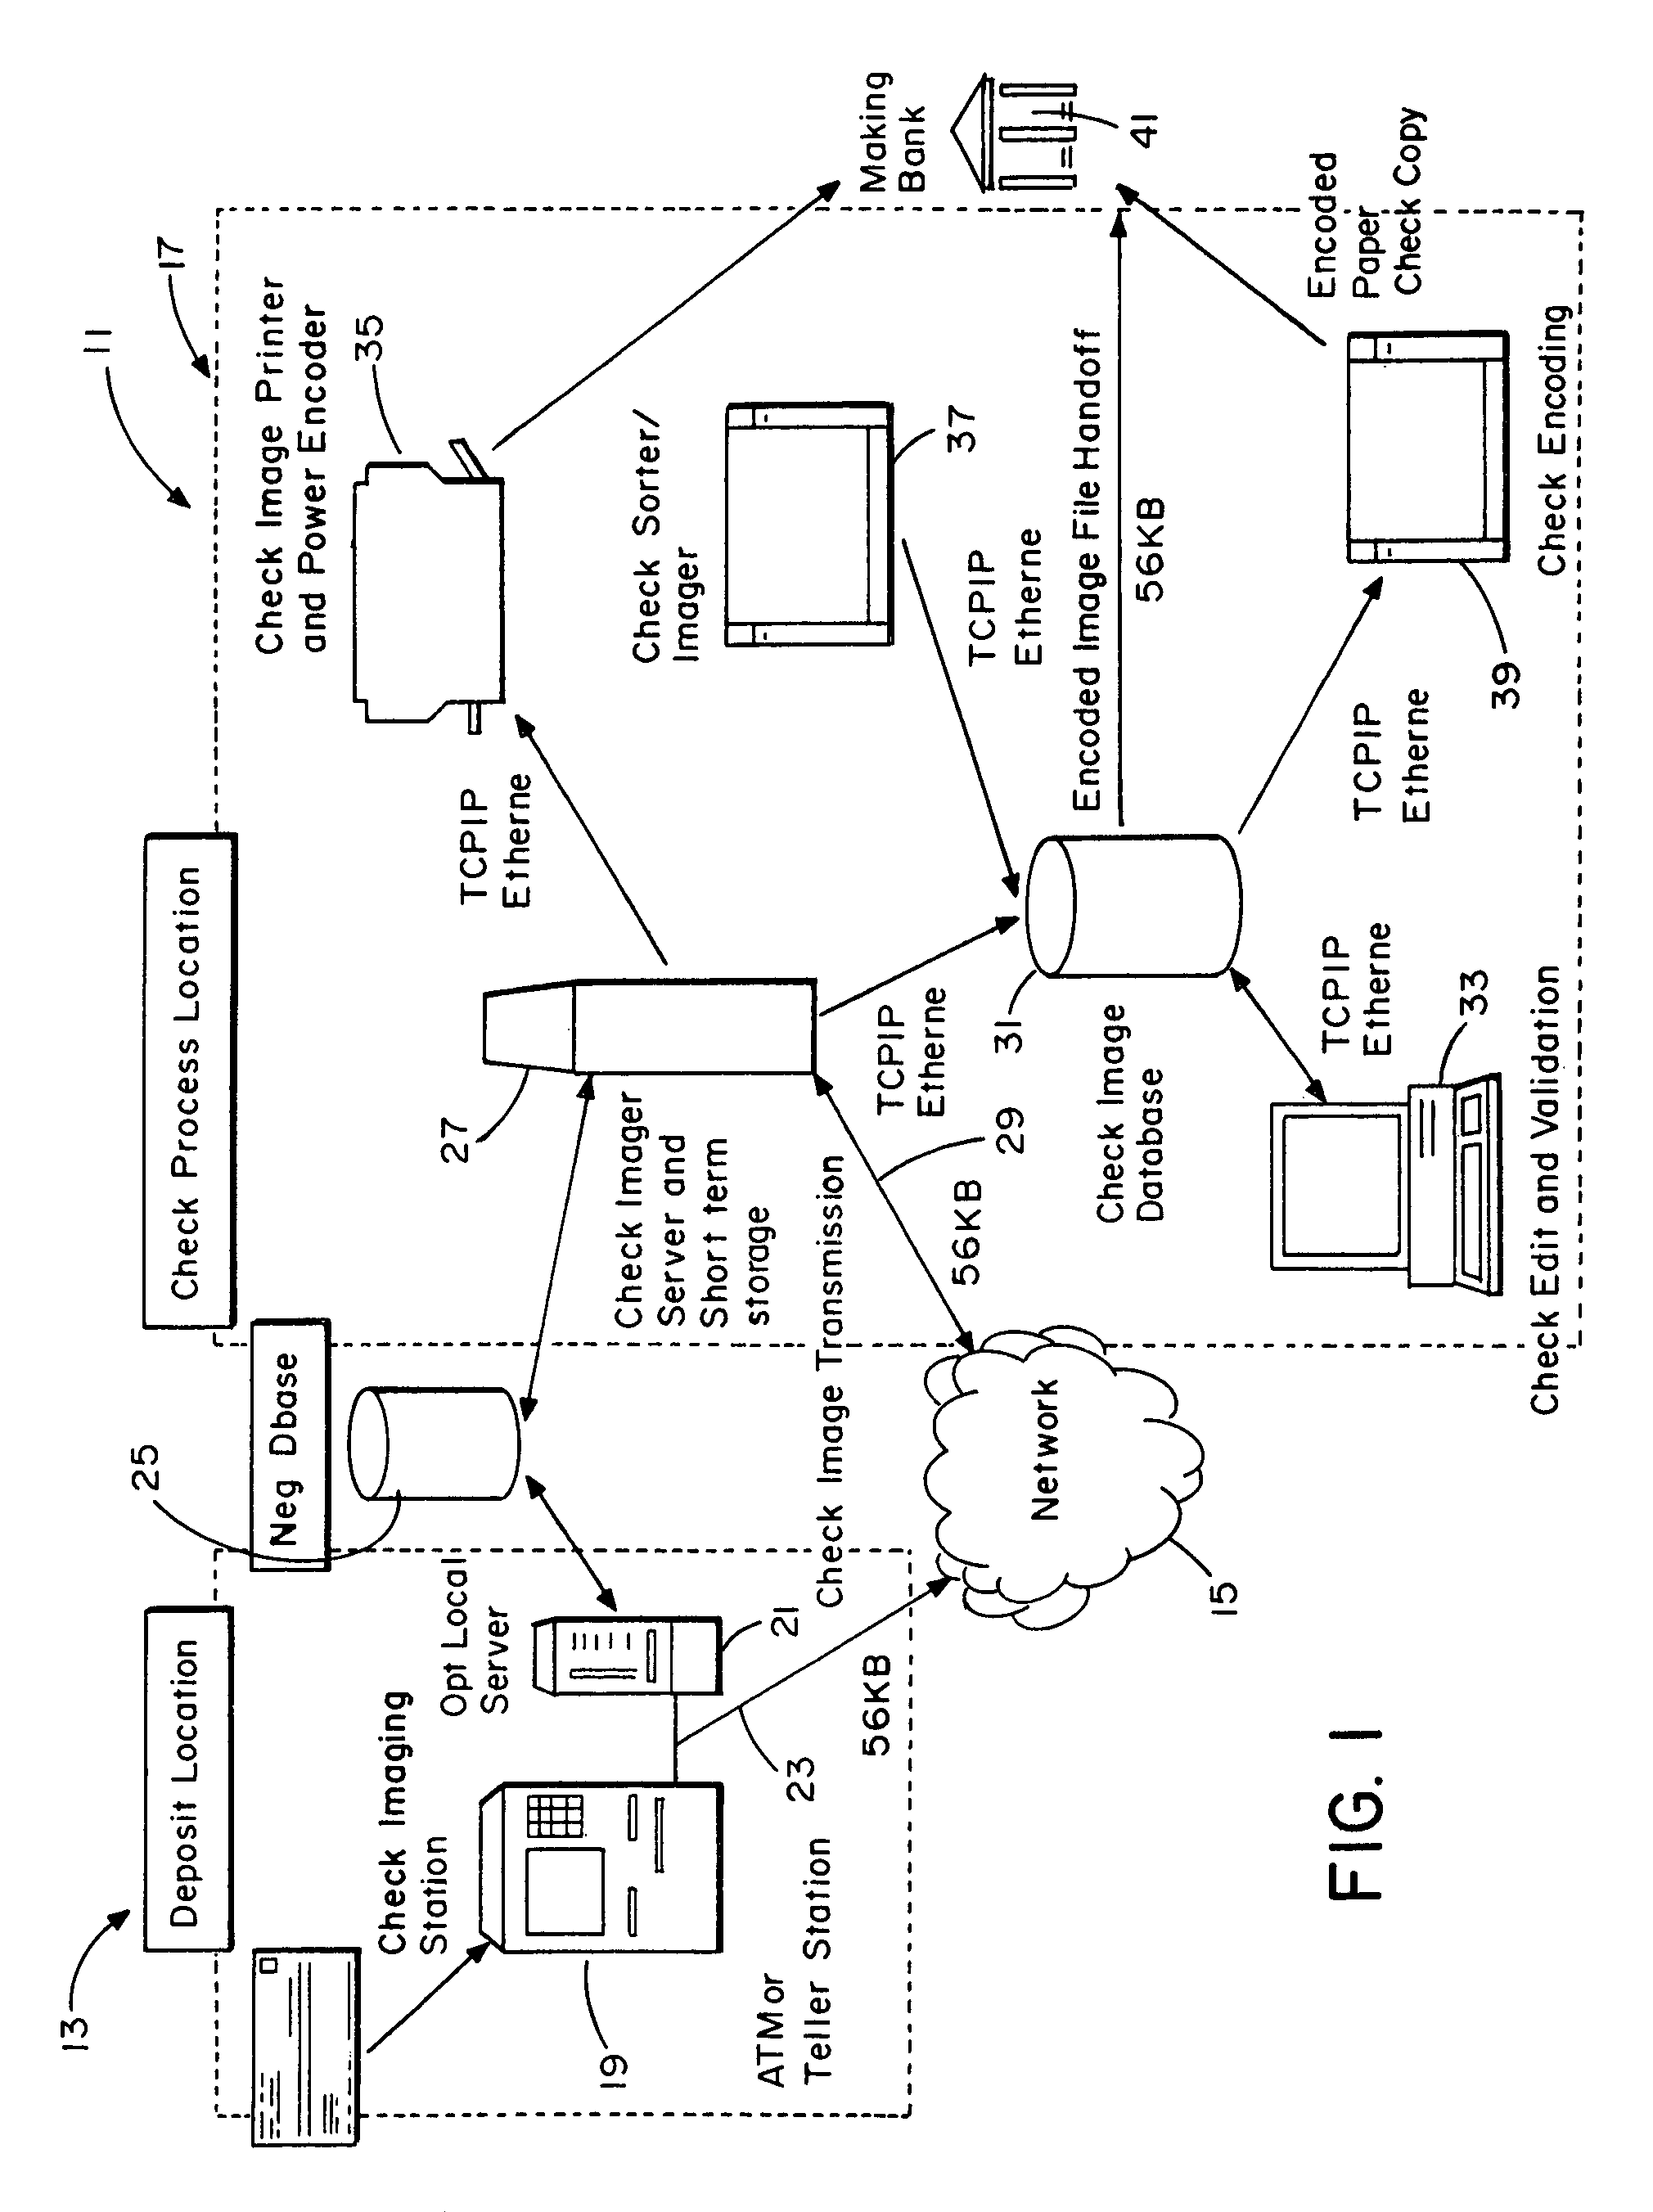 System and method for image depositing, image presentment and deposit taking in a commercial environment